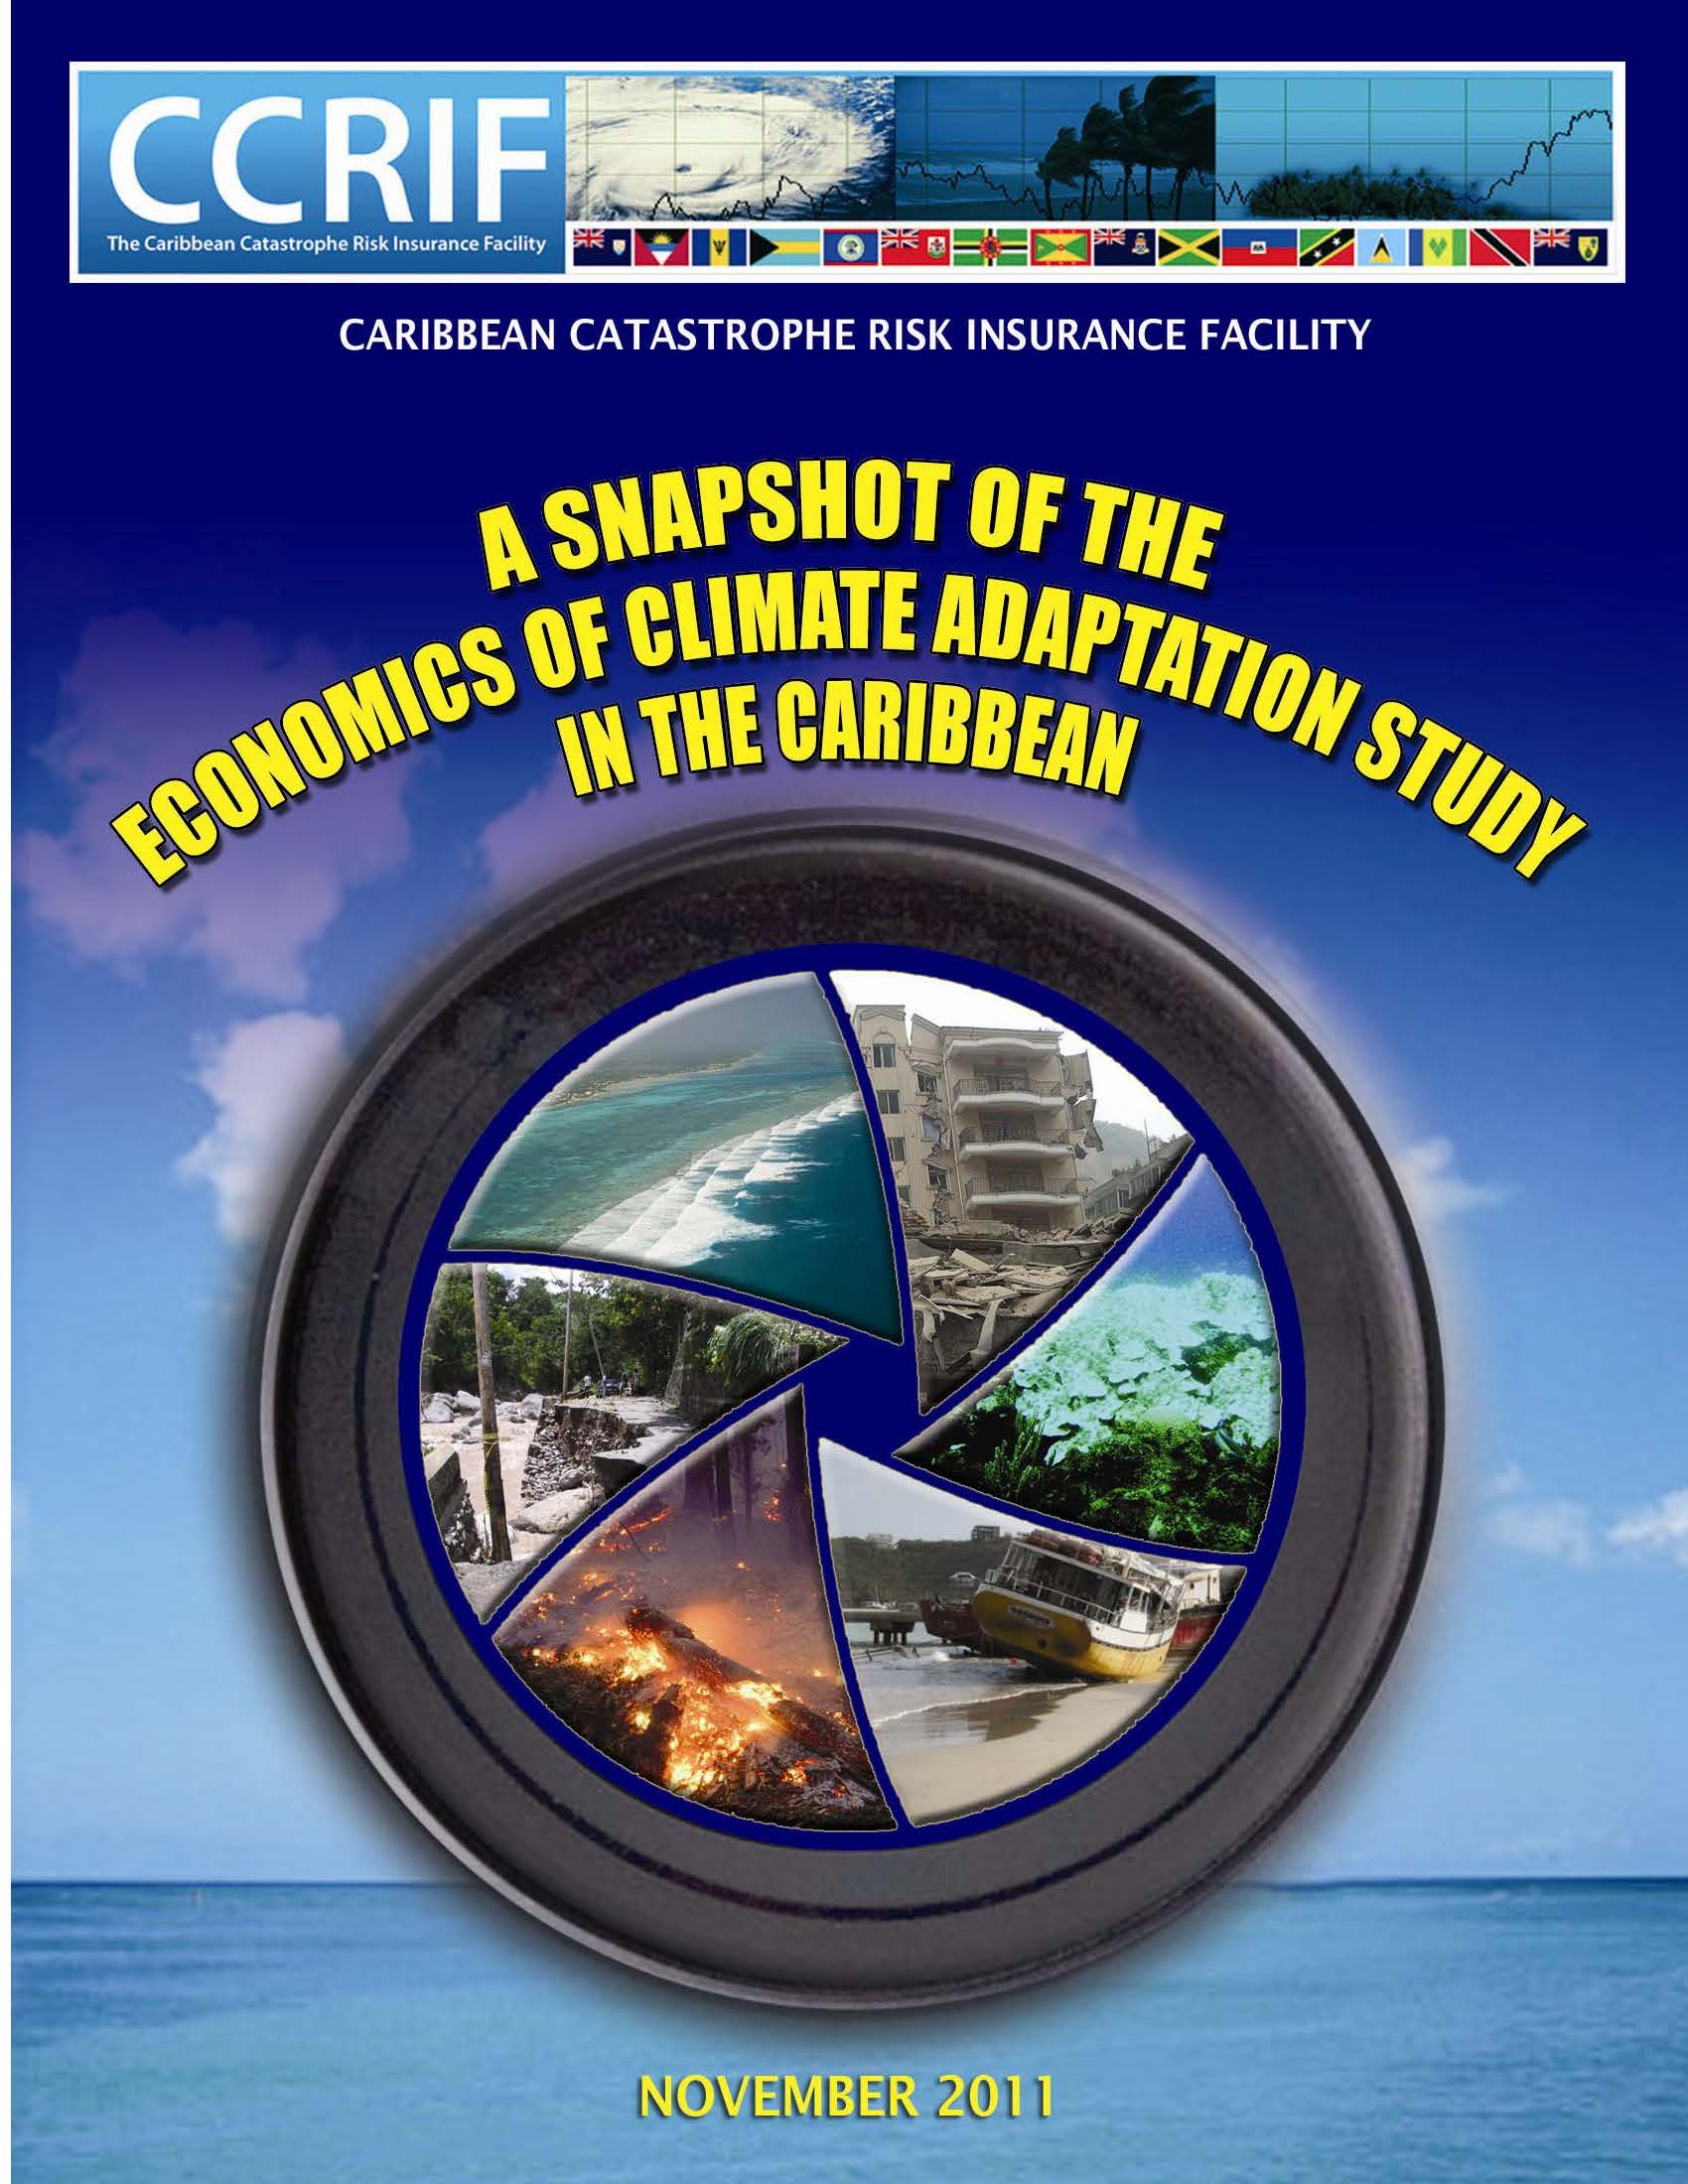 A Snapshot of the Economics of Climate Adaptation Study in the Caribbean